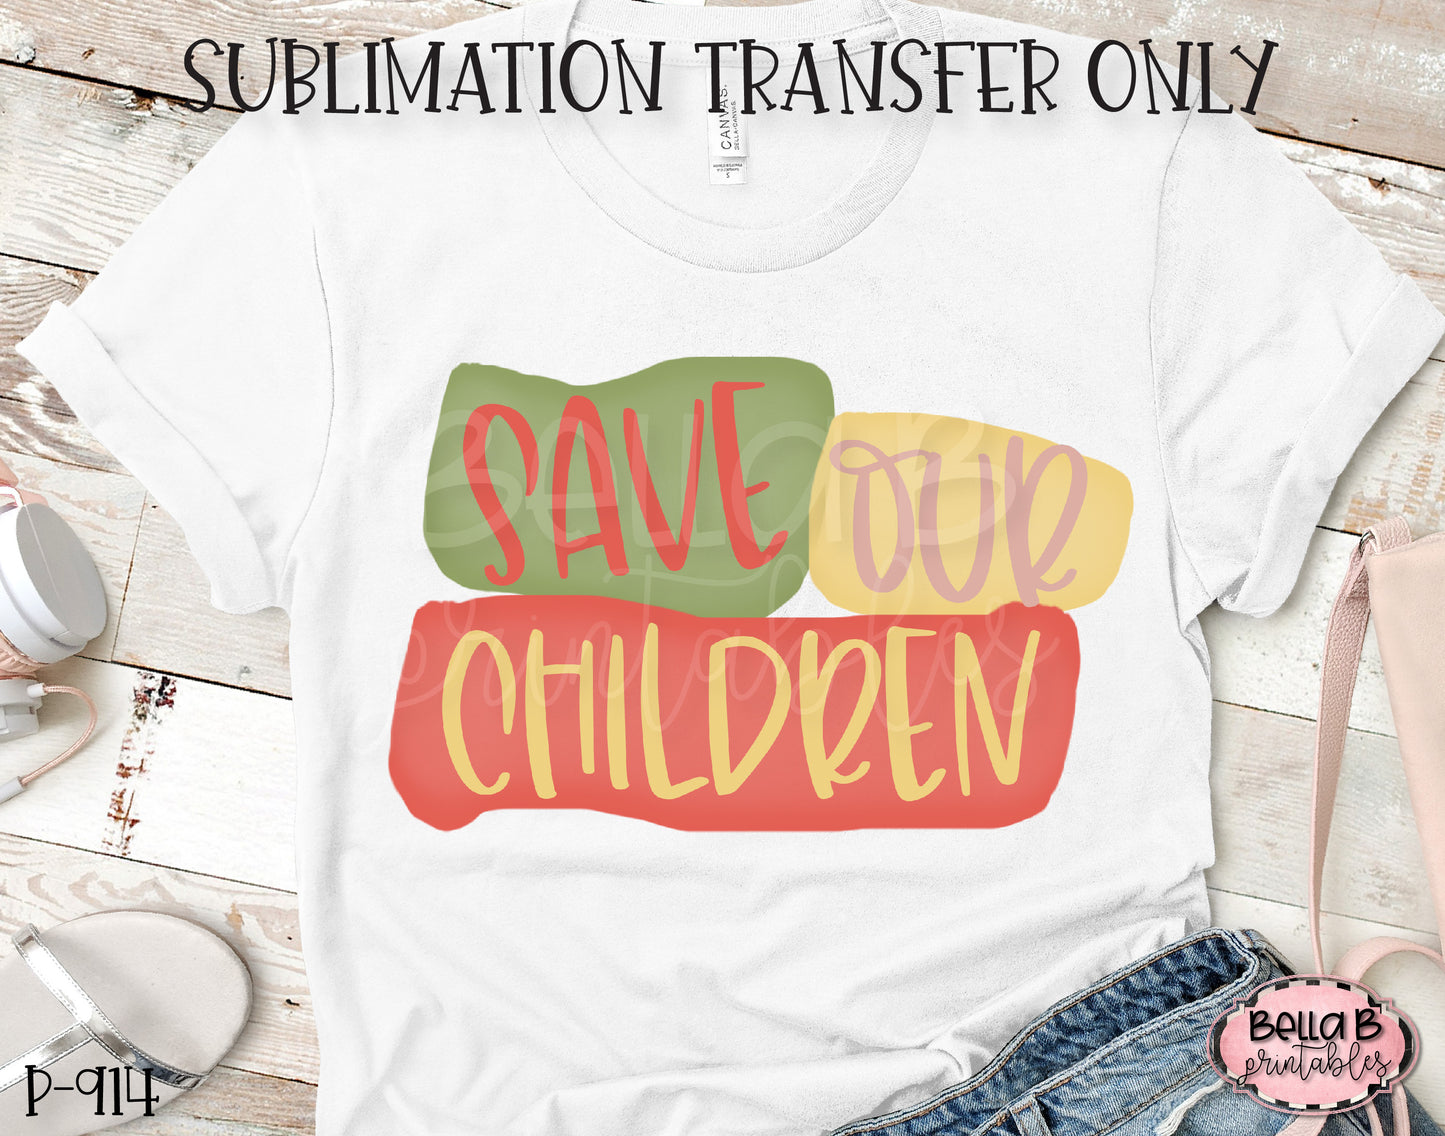 Save Our Children Human Trafficking Sublimation Transfer, Ready To Press